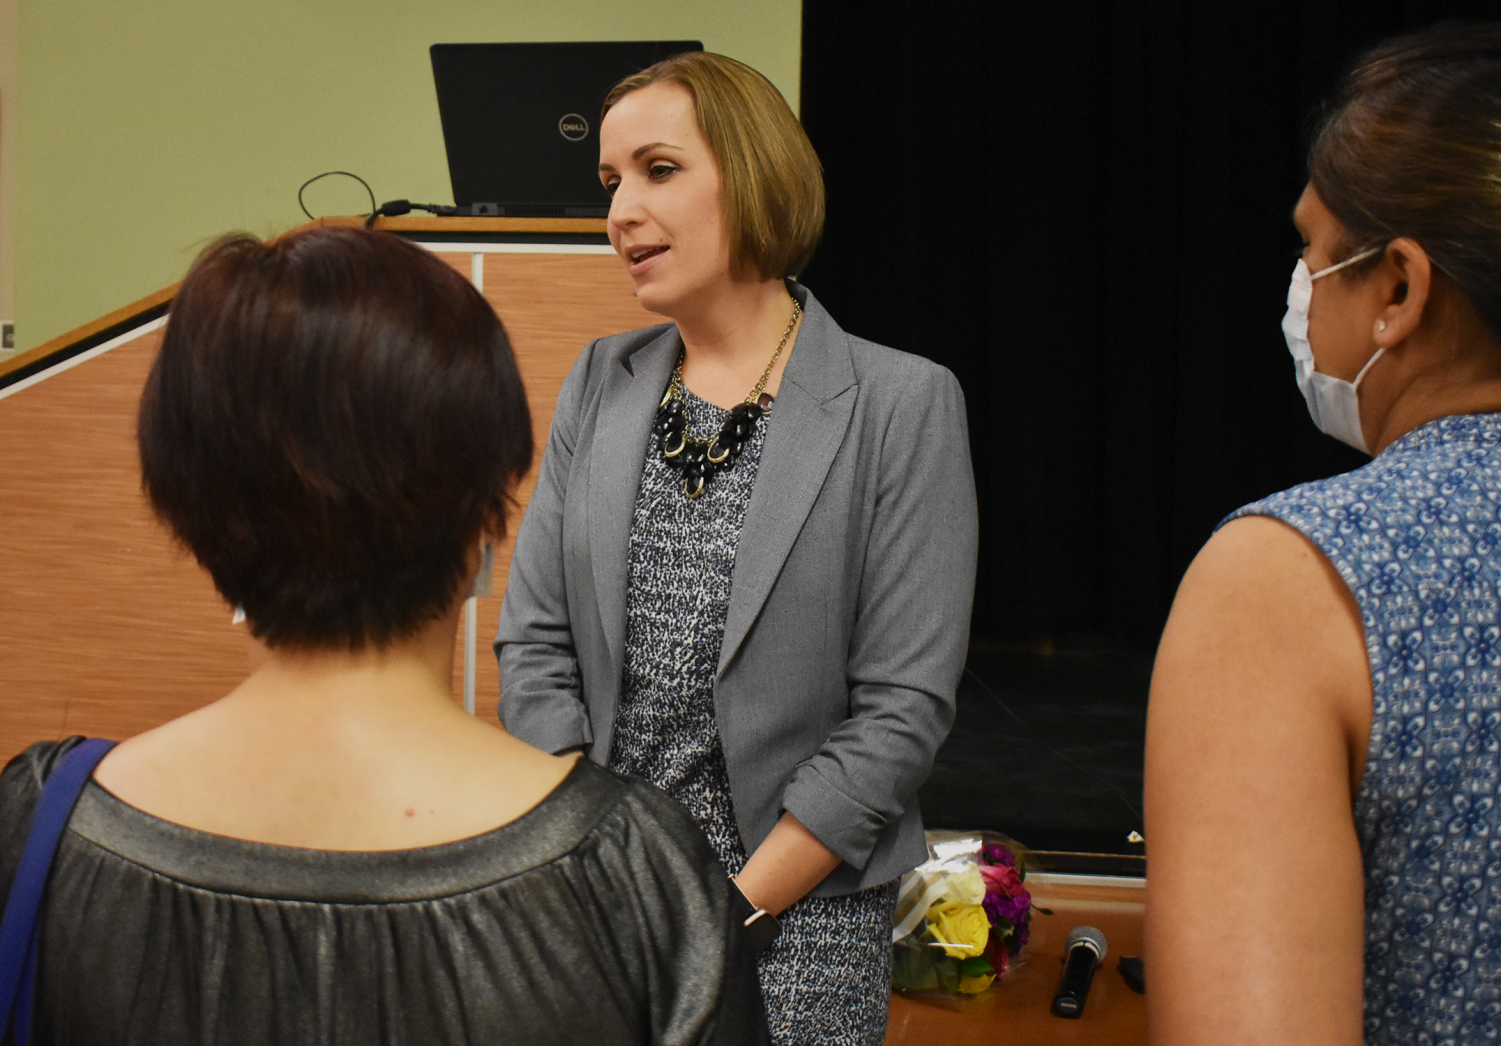 Ms.+Erin+Campbell+Discusses+Goals+as+Principal+at+Community+Meet-and-Greet